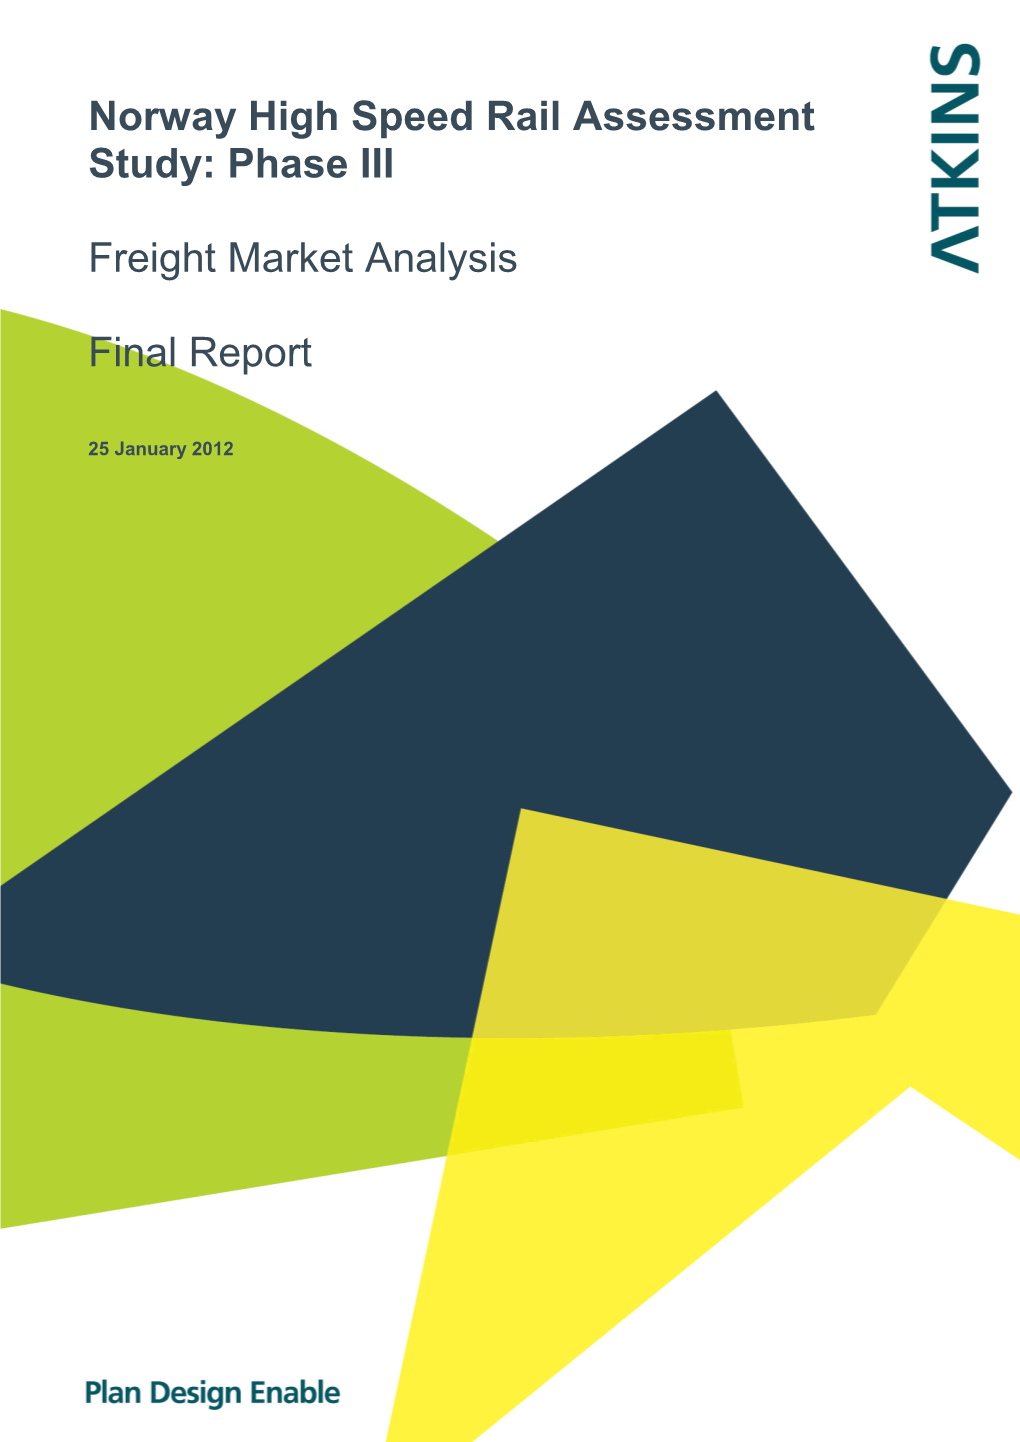 Norway High Speed Rail Assessment Study: Phase III Freight Market